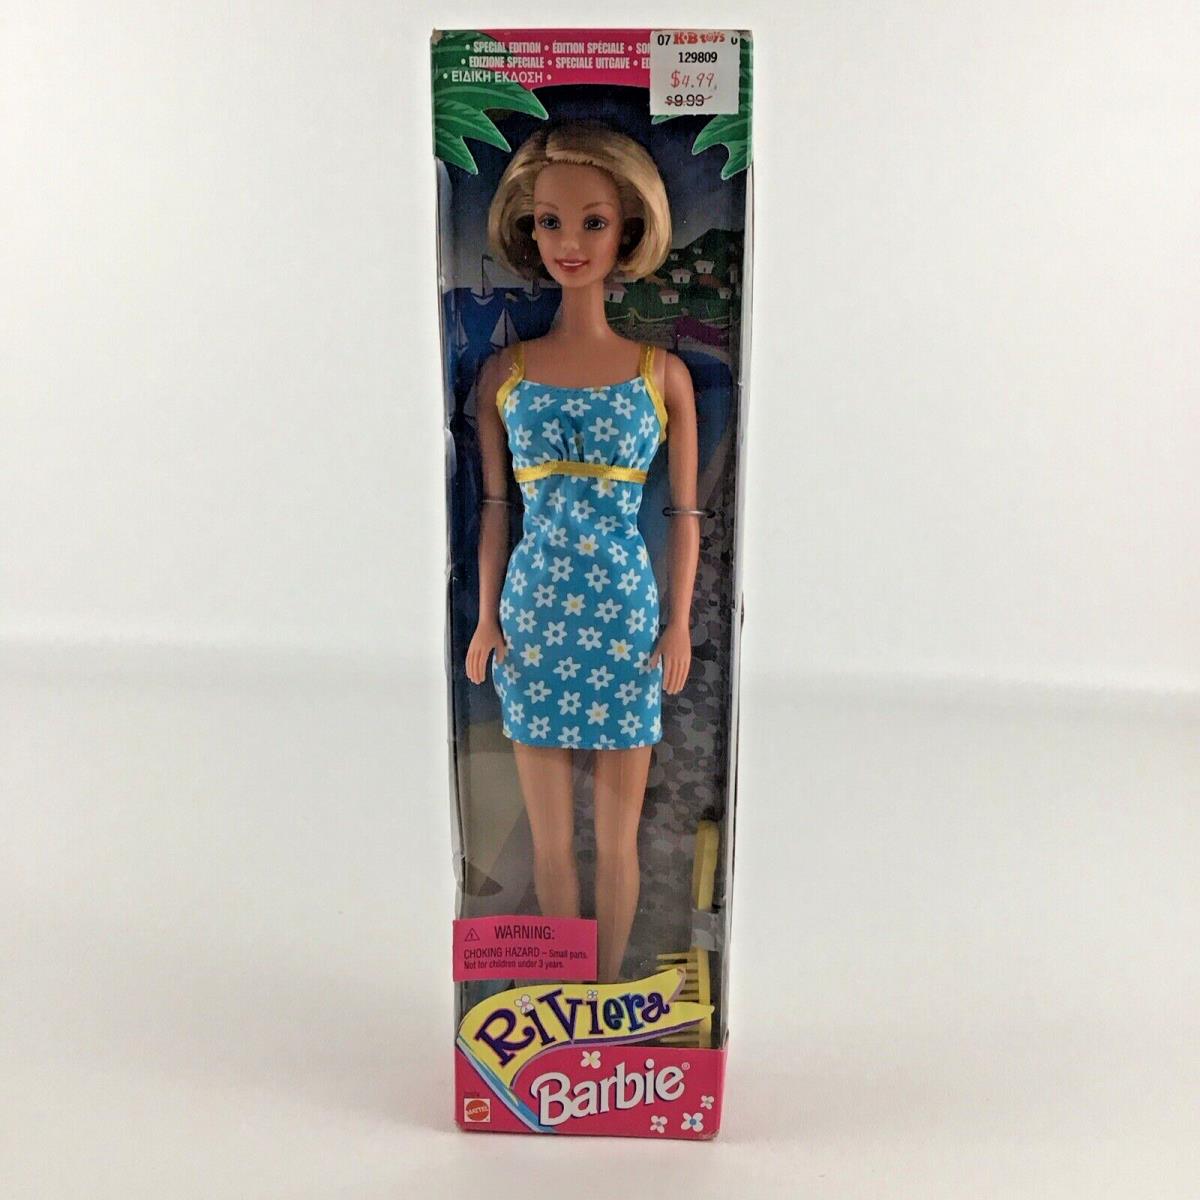 Riviera Barbie Fashion Doll Special Edition Collectible Vintage 1998 Mattel 90s